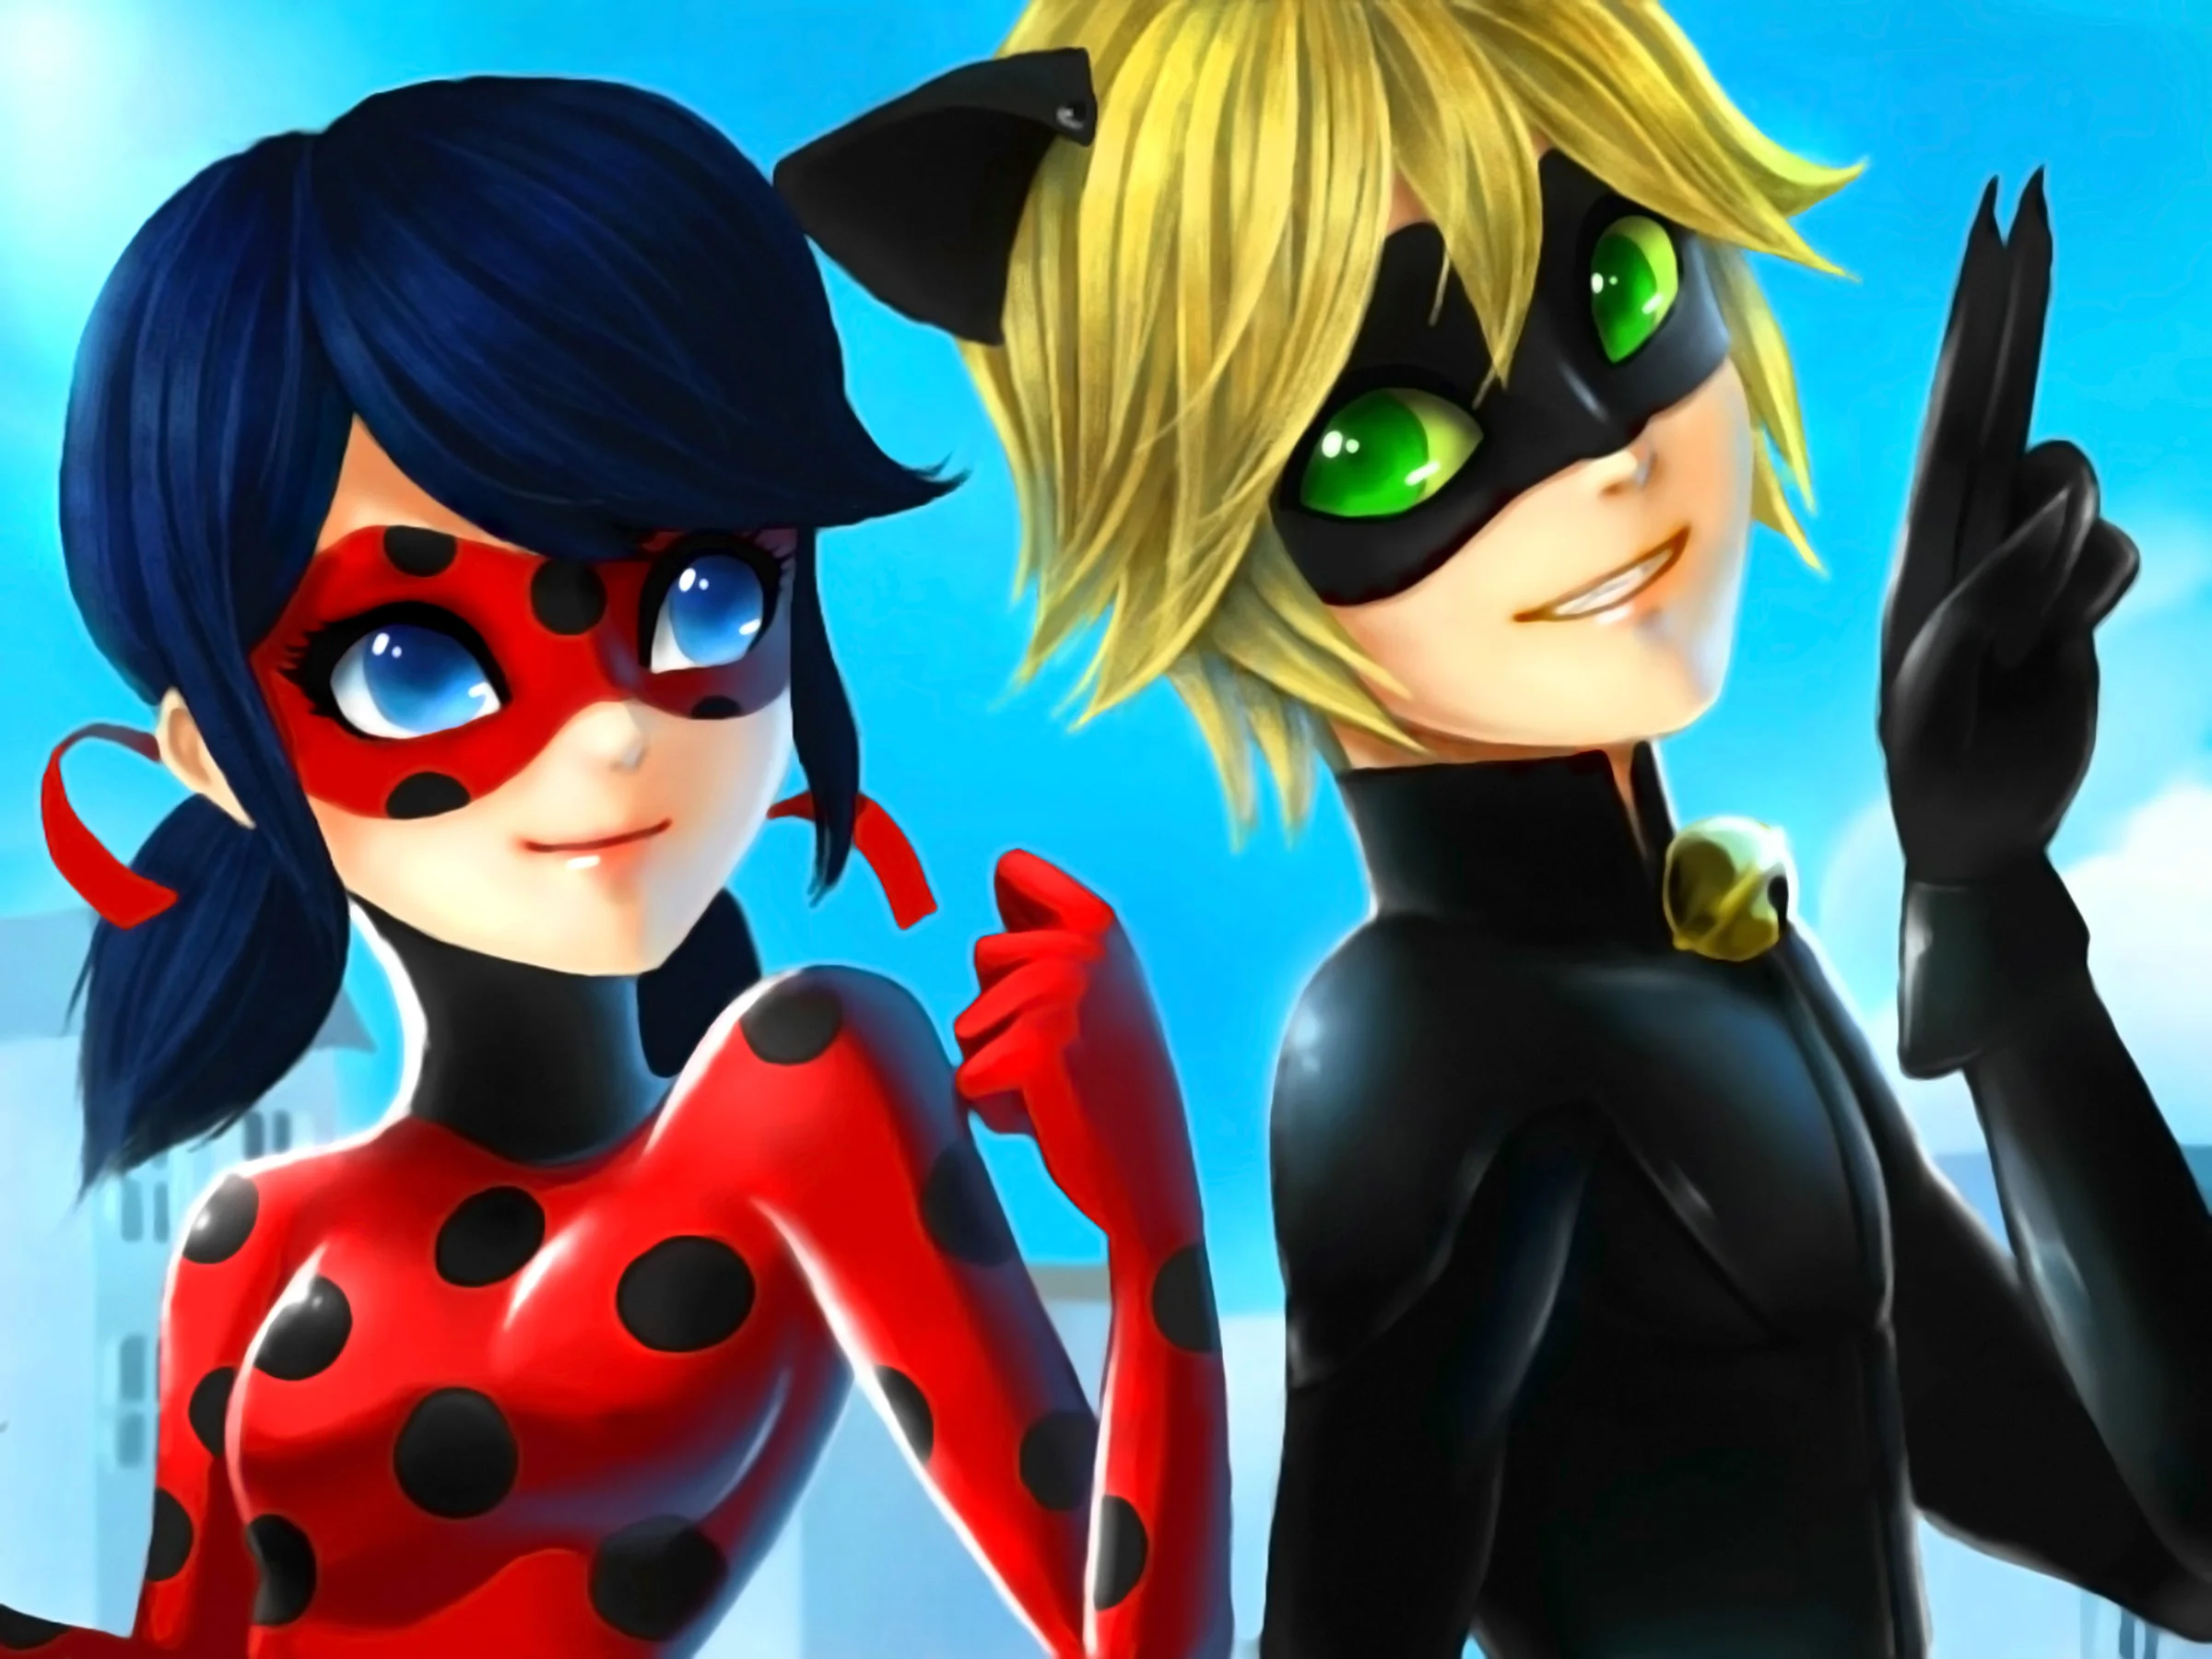 Miraculous Ladybug And Chat Noir by Flannel-kun.